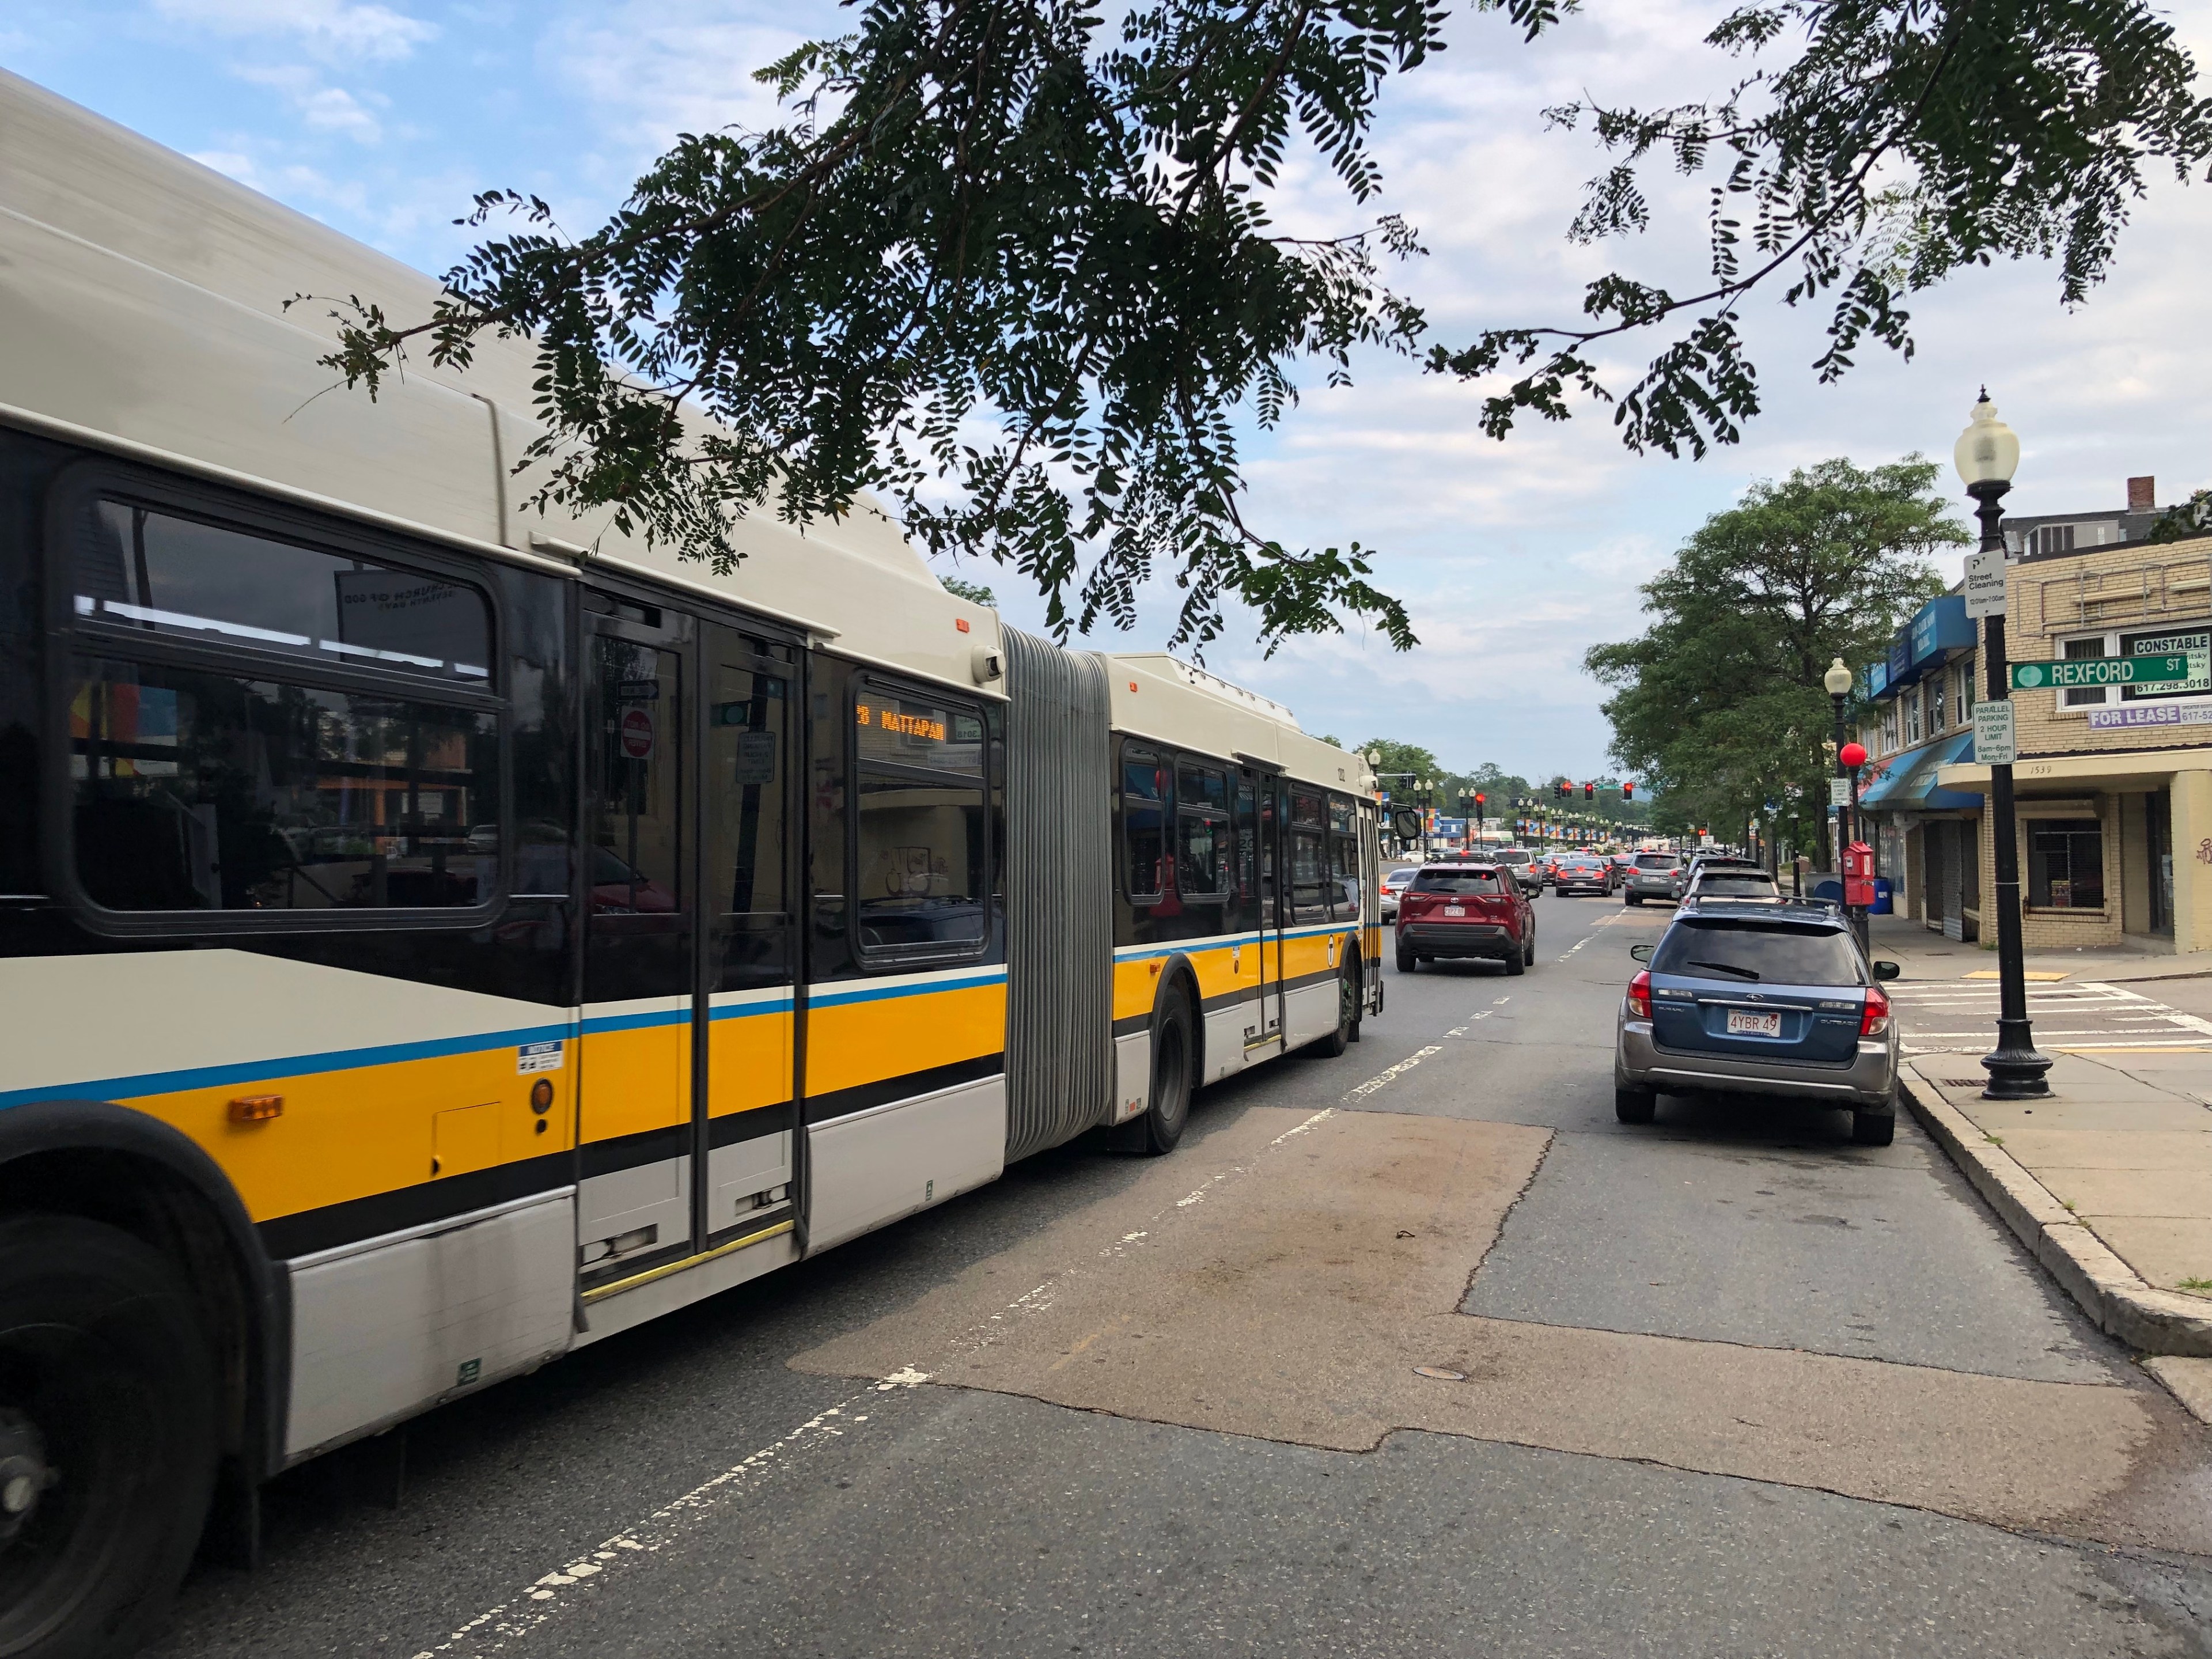 An extra-long articulated bus in the white, yellow, and black MBTA color scheme waits in traffic on a wide multi-lane street with a red light in the distance. An electronic sign in a side window of the bus says "28 MATTAPAN." A street sign on the left says "Rexford Street".